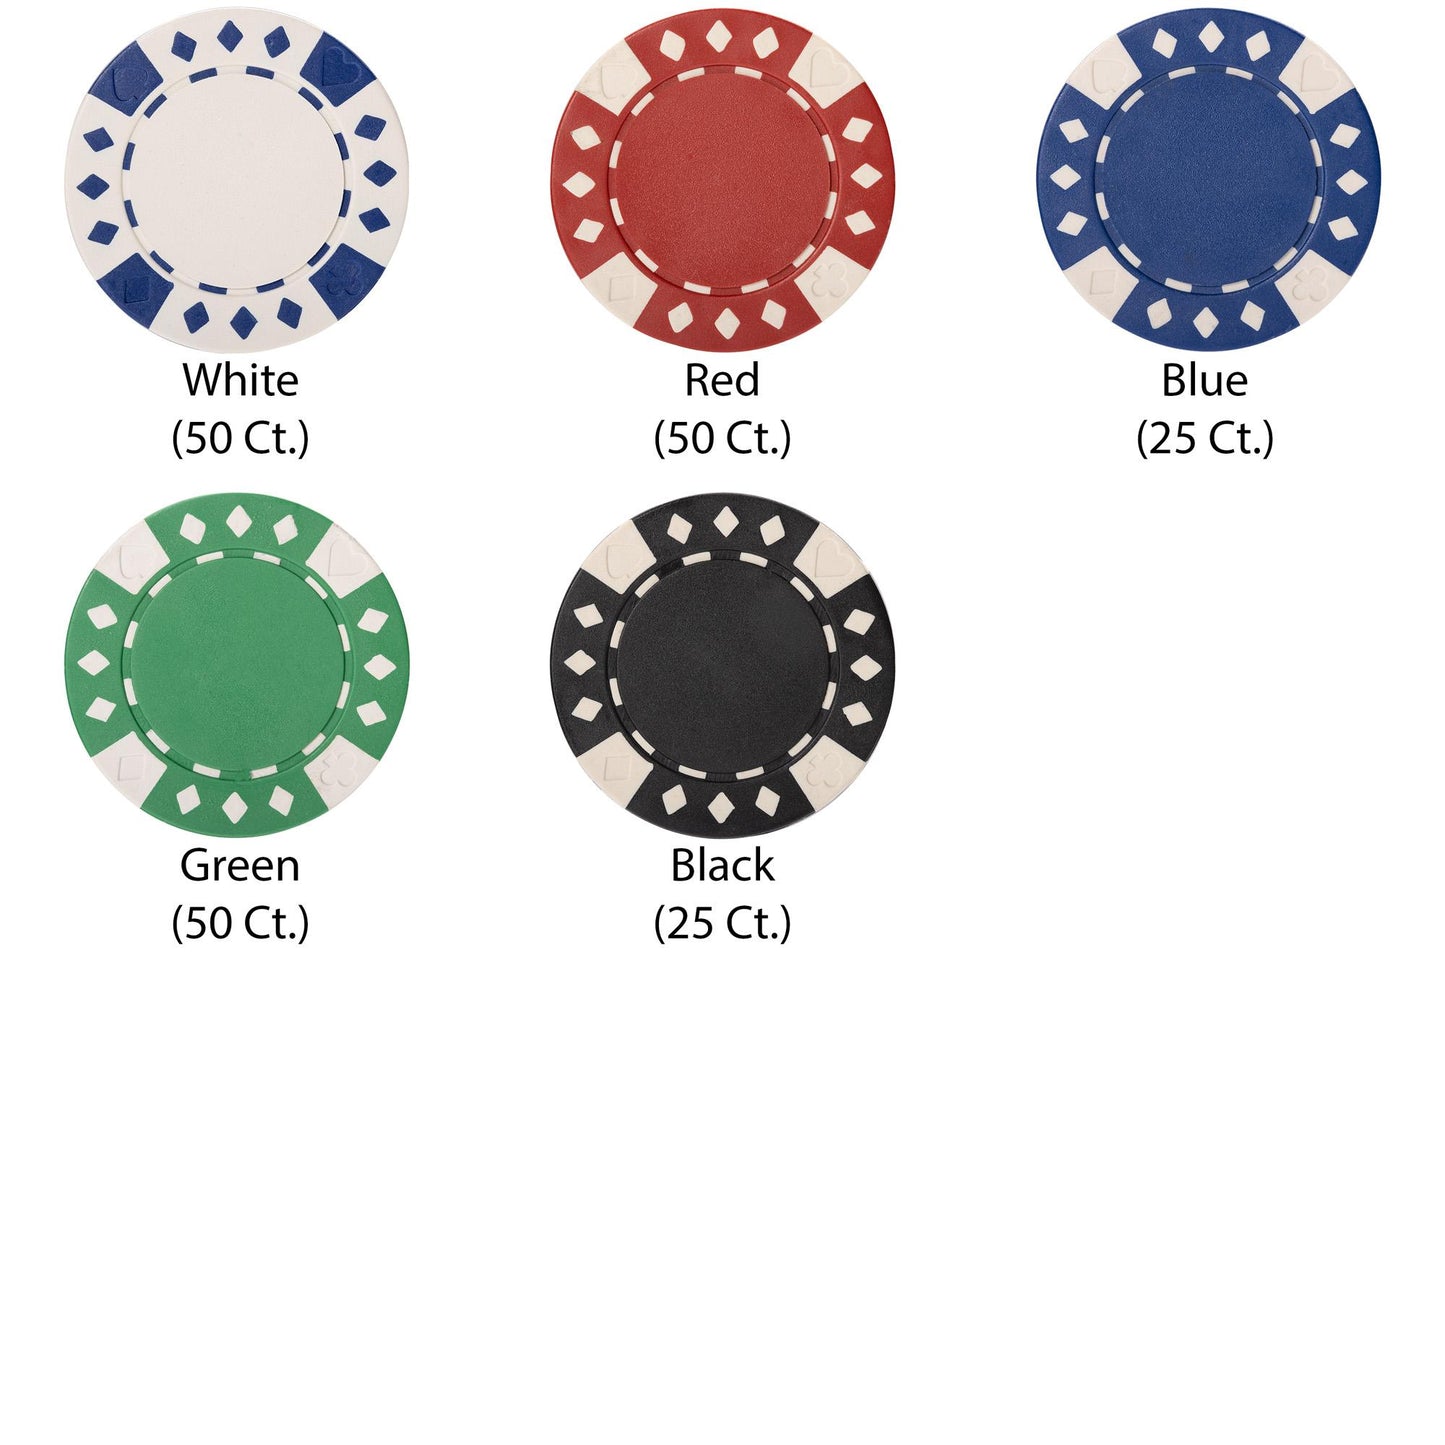 200 Diamond Suited Poker Chips with Acrylic Tray